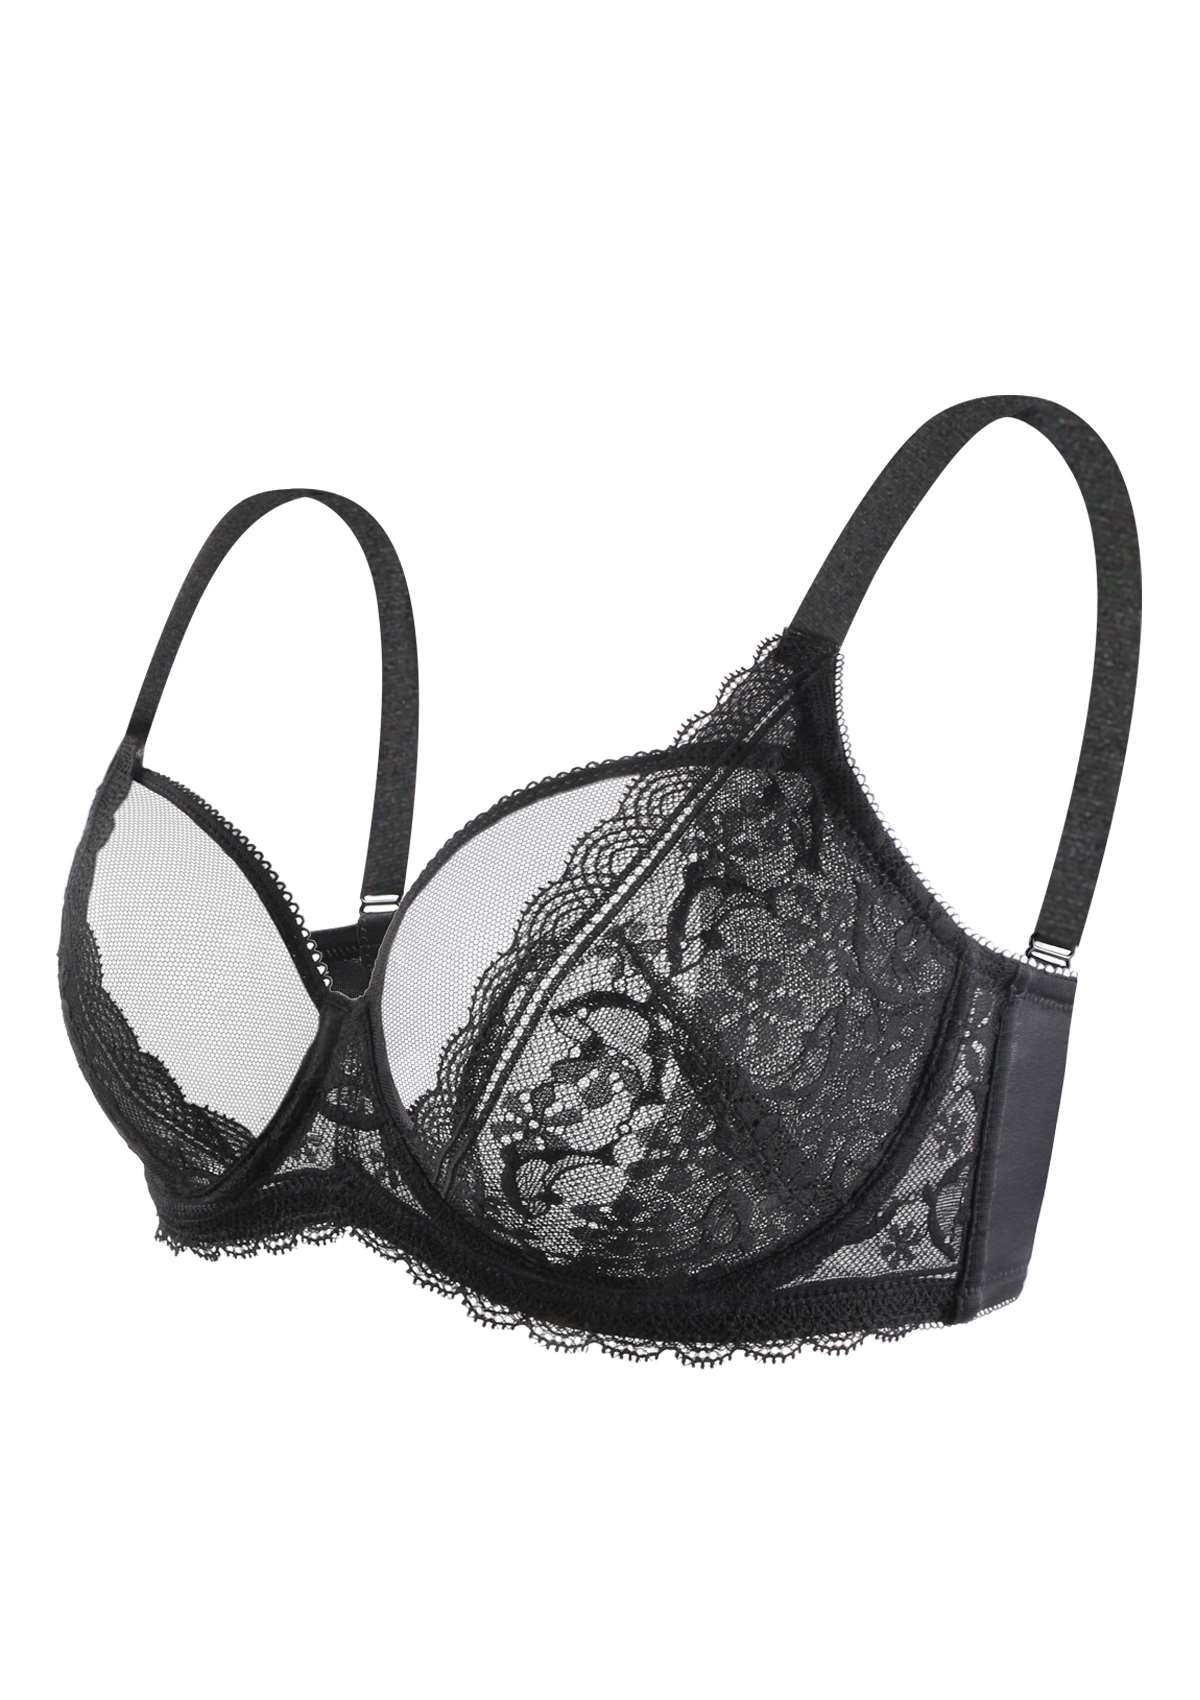 HSIA Anemone Lace Bra And Panties: Back Support Wired Bra - Black / 42 / DD/E